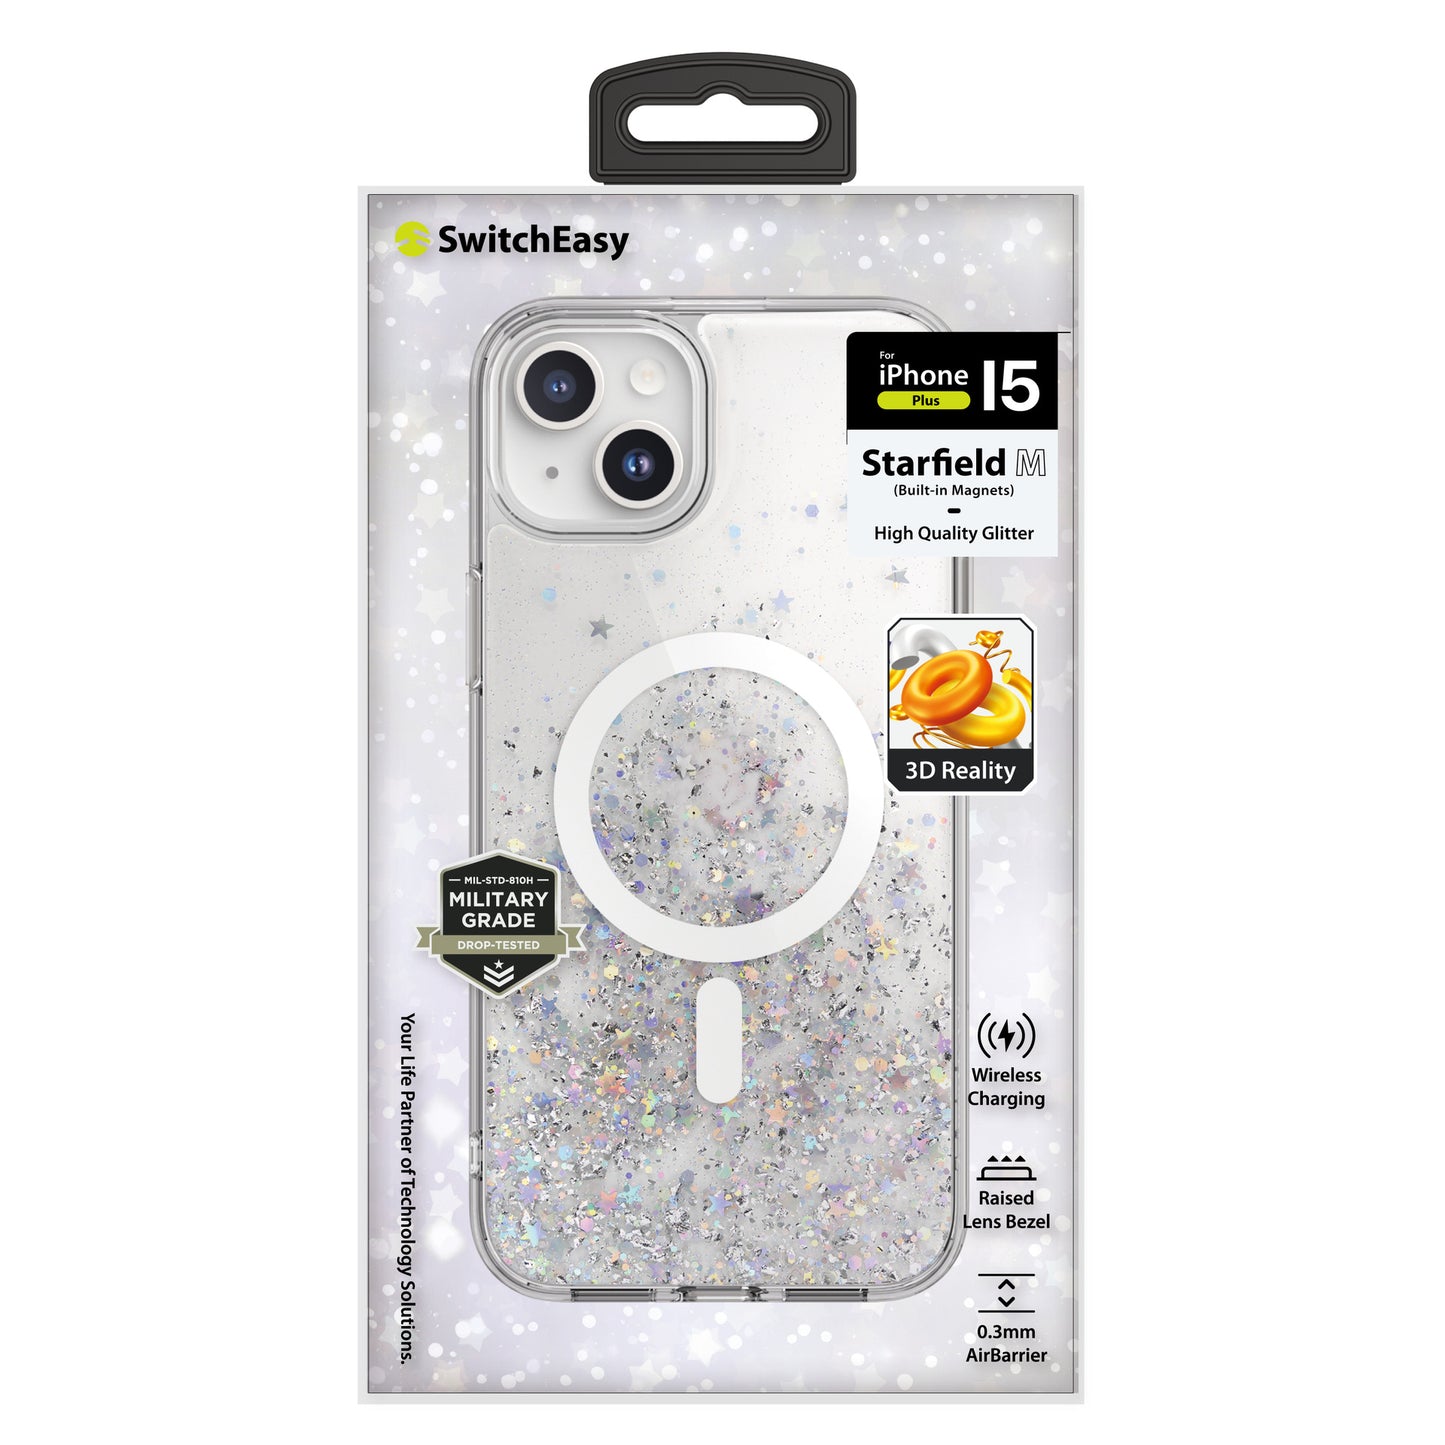 SwitchEasy Starfield M MagSafe 3D Glitter Resin Case Cover